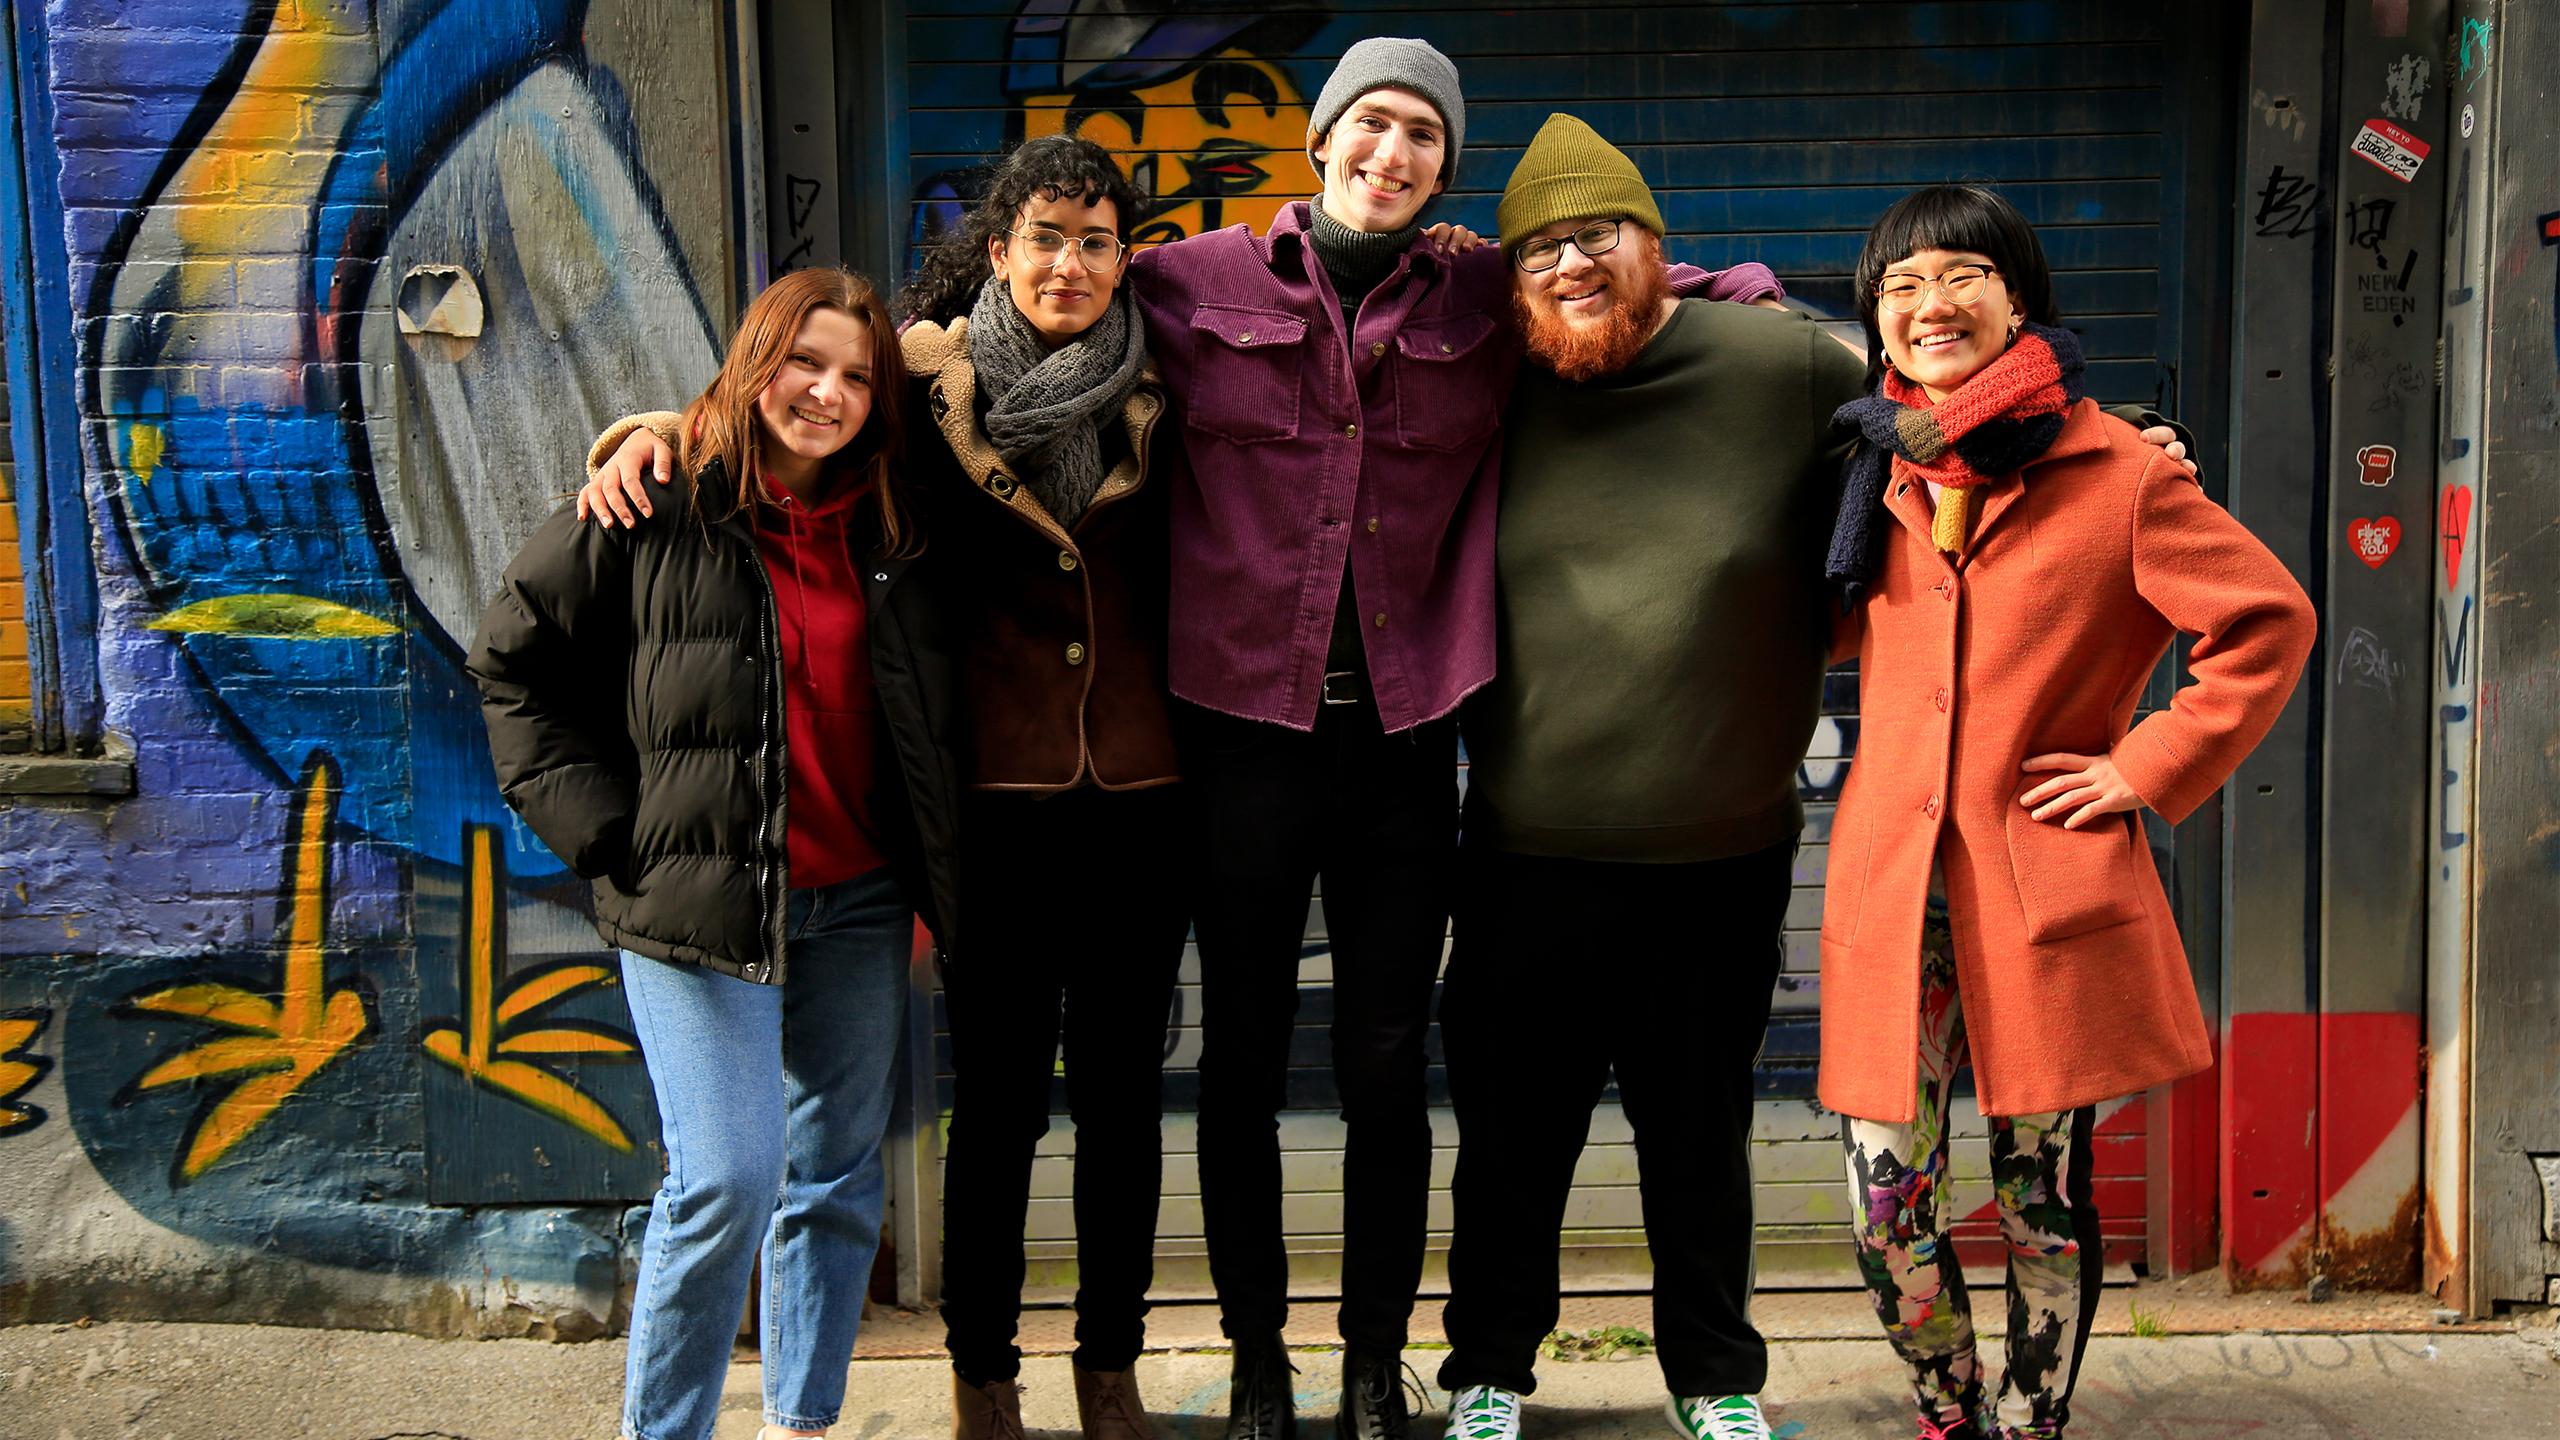 from left to right volunteers Sheridan Riggillo , Sofia Nemecek, Colwyn Alletson, Ethan Goldberg , Vicky Wang standing together in front of a graffiti wall